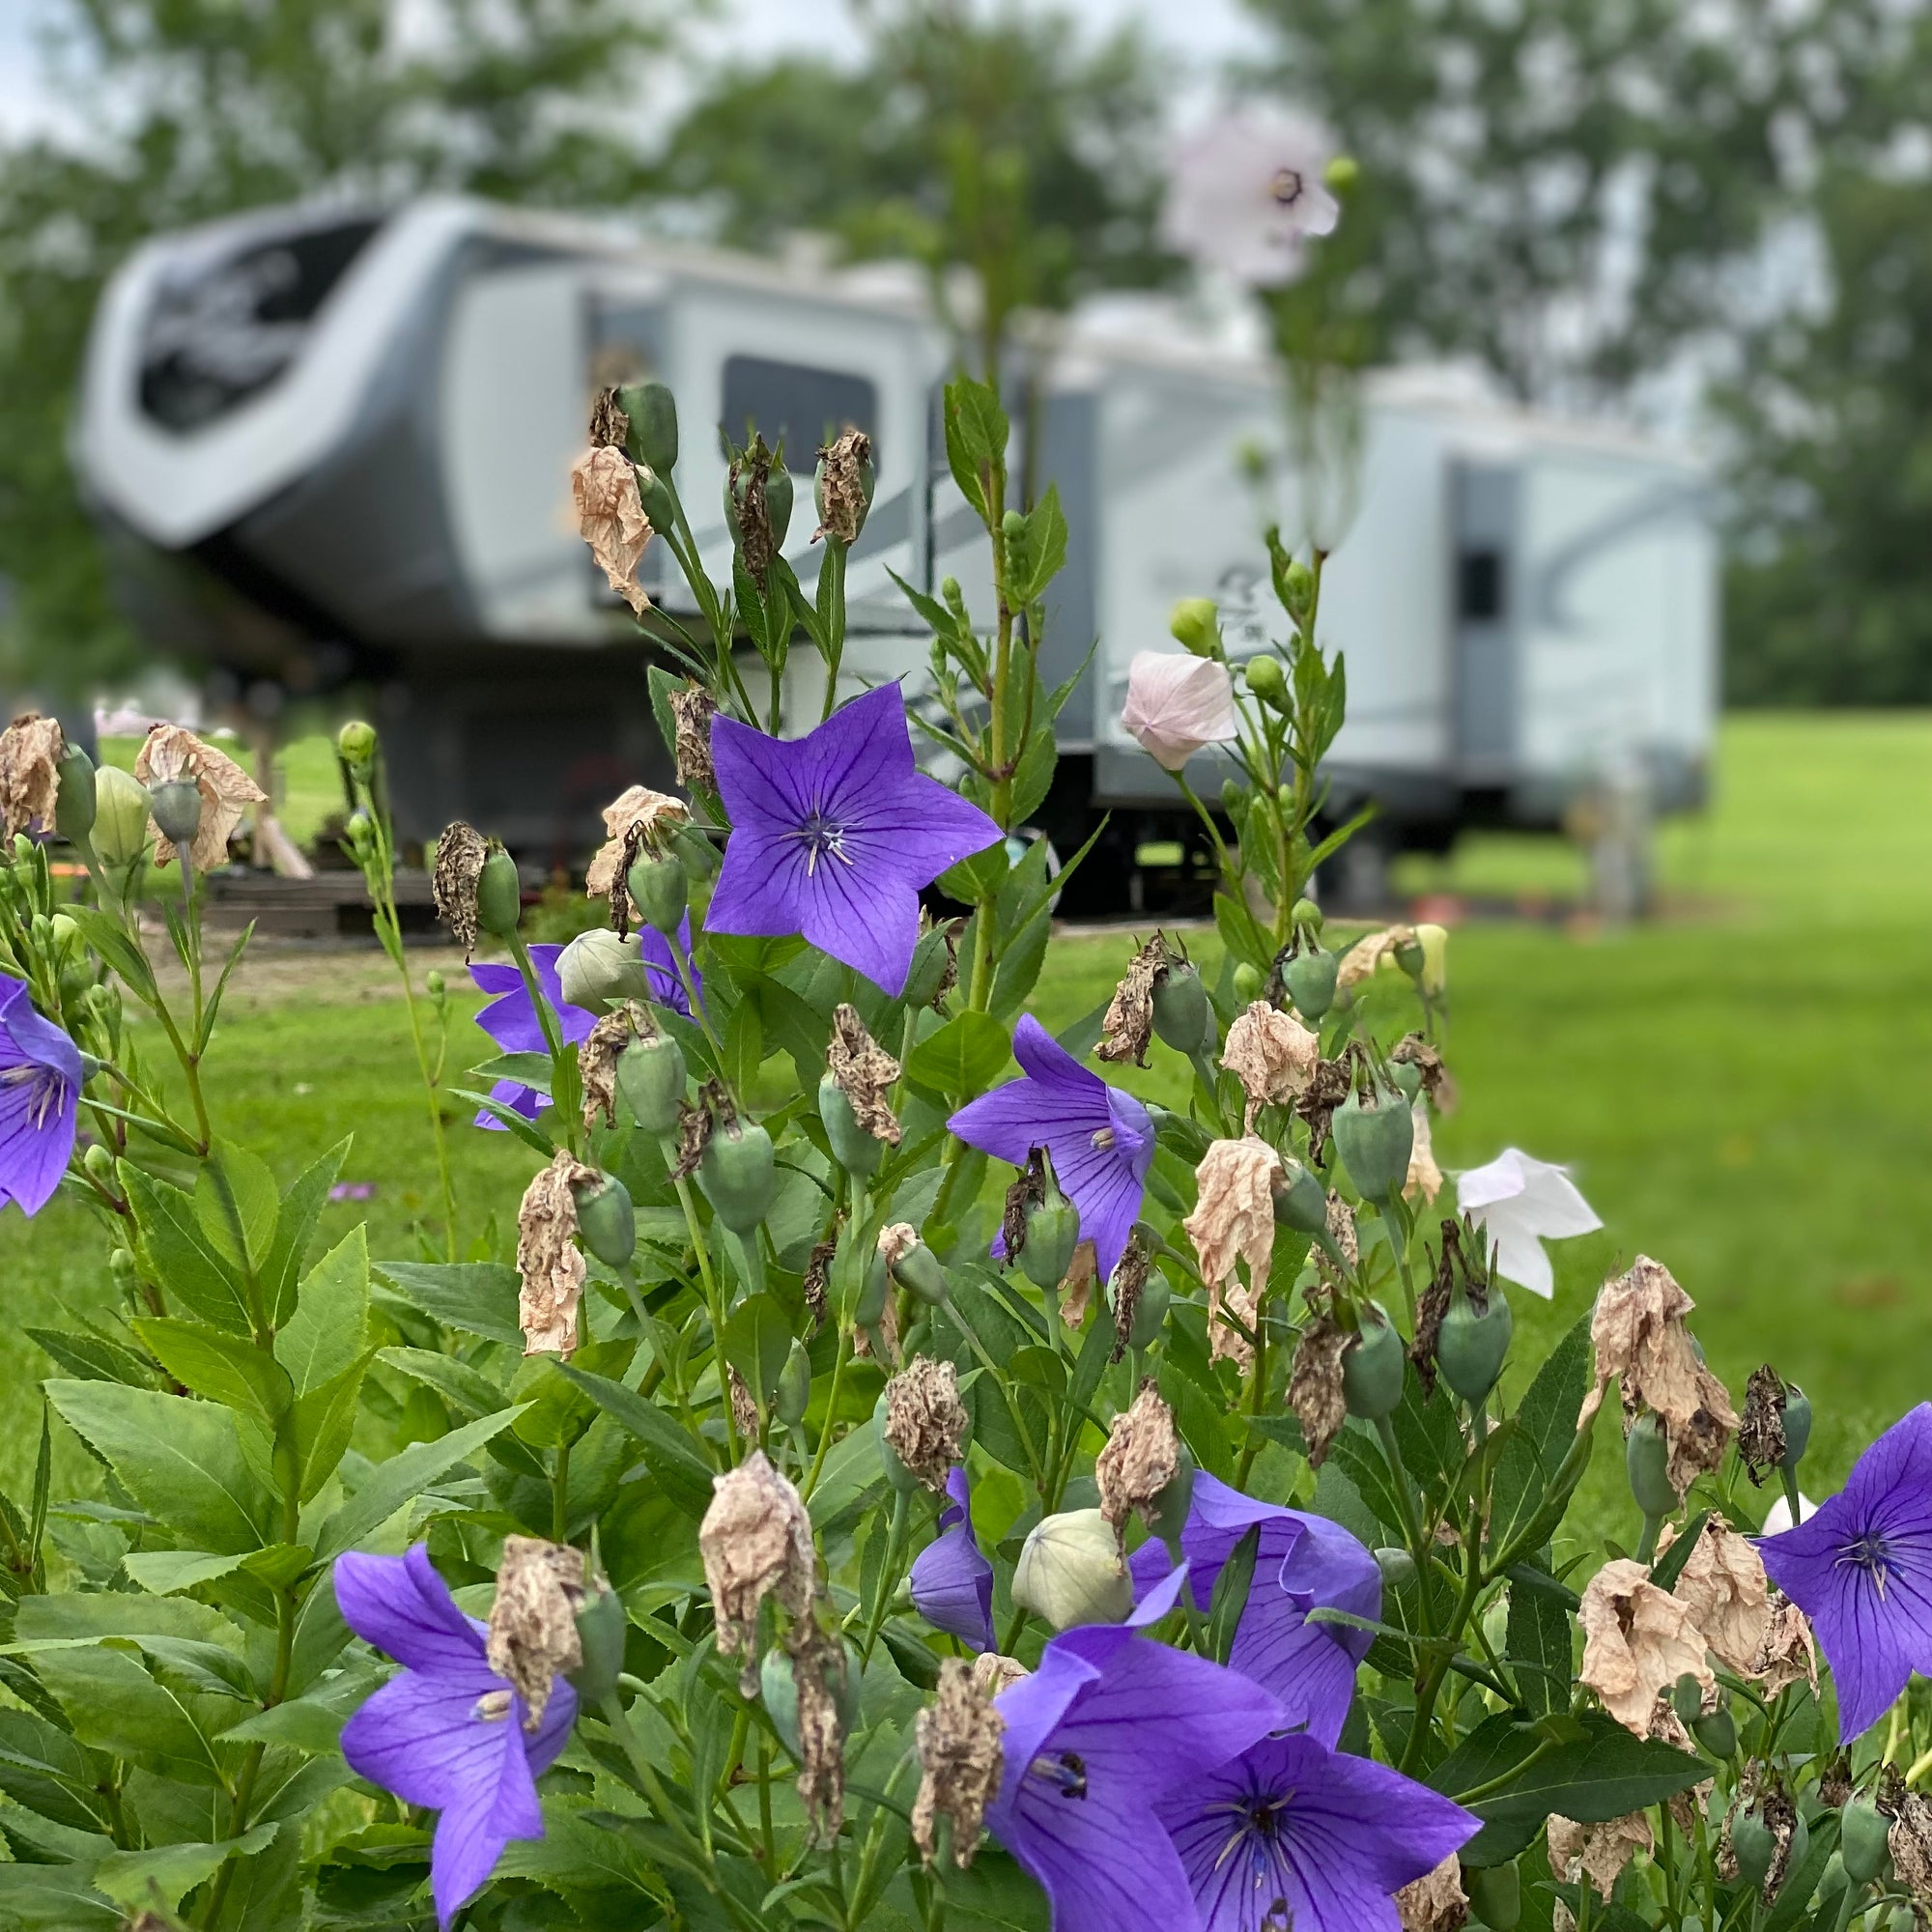 purple flowers in the foreground of picture and a 5th wheel camper backed into spot in the background of picture